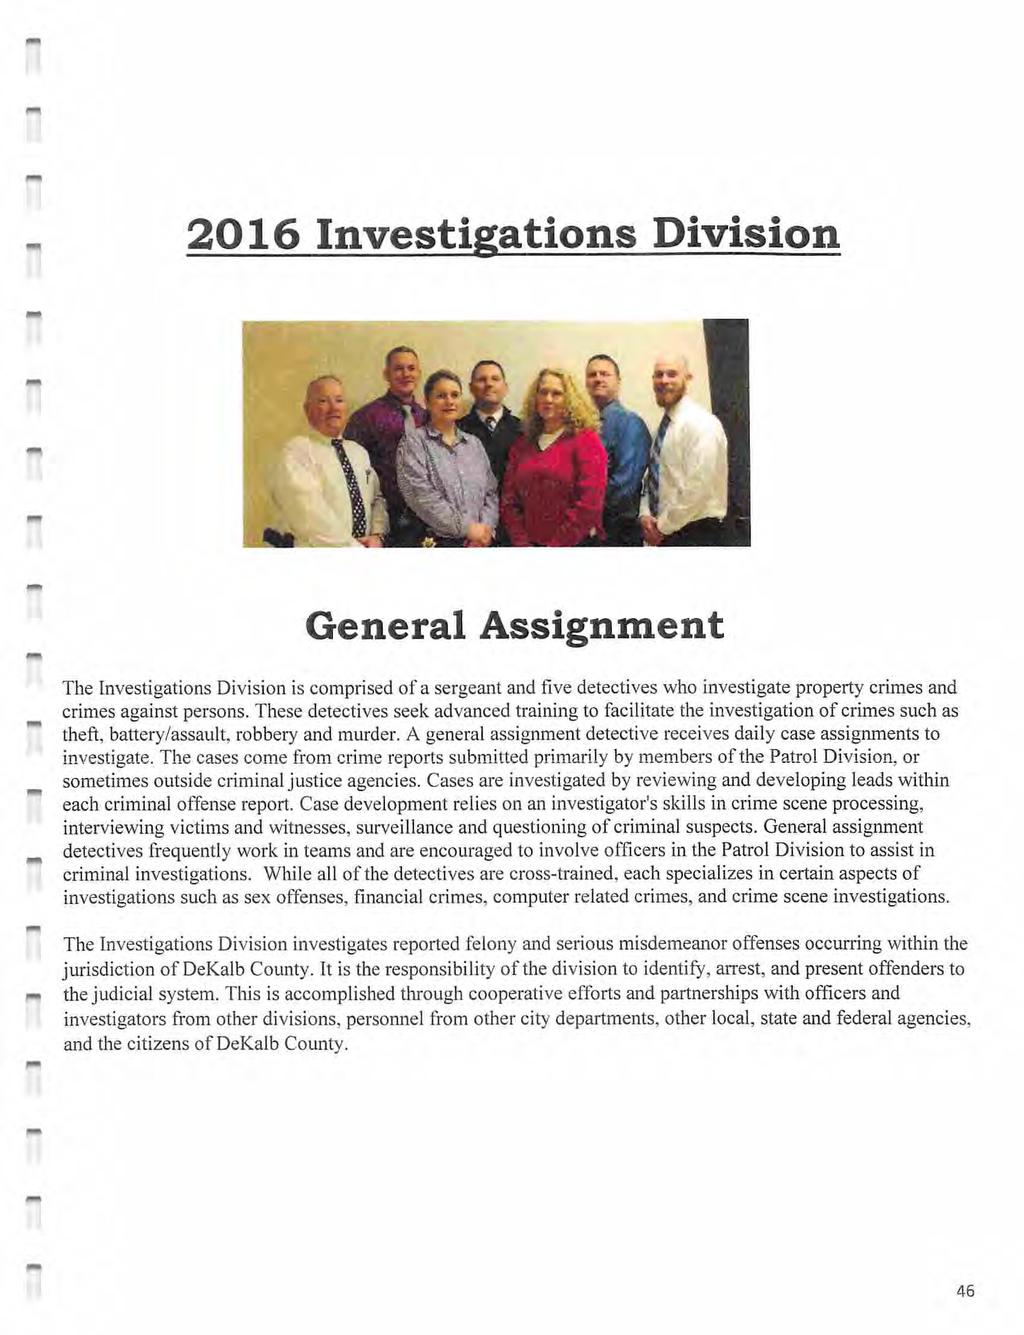 2016 Investigations Division General Assignment The Investigations Division is comprised ofa sergeant and five detectives who investigate property crimes and crimes against persons.